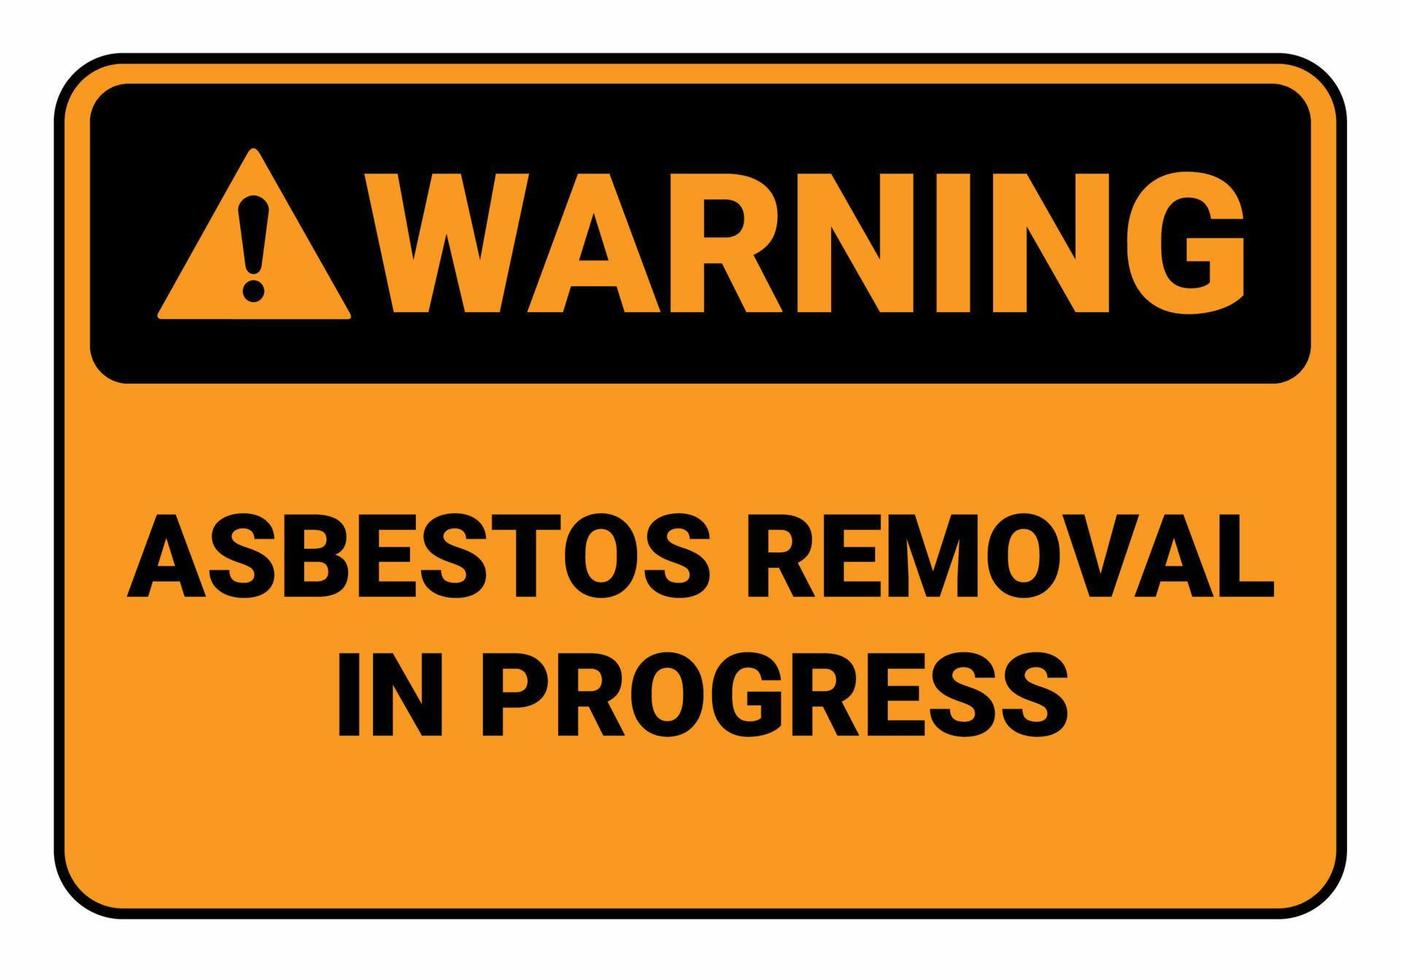 Warning Asbestos removal in progress. OSHA and ANSI standard sign. Safety sign. vector